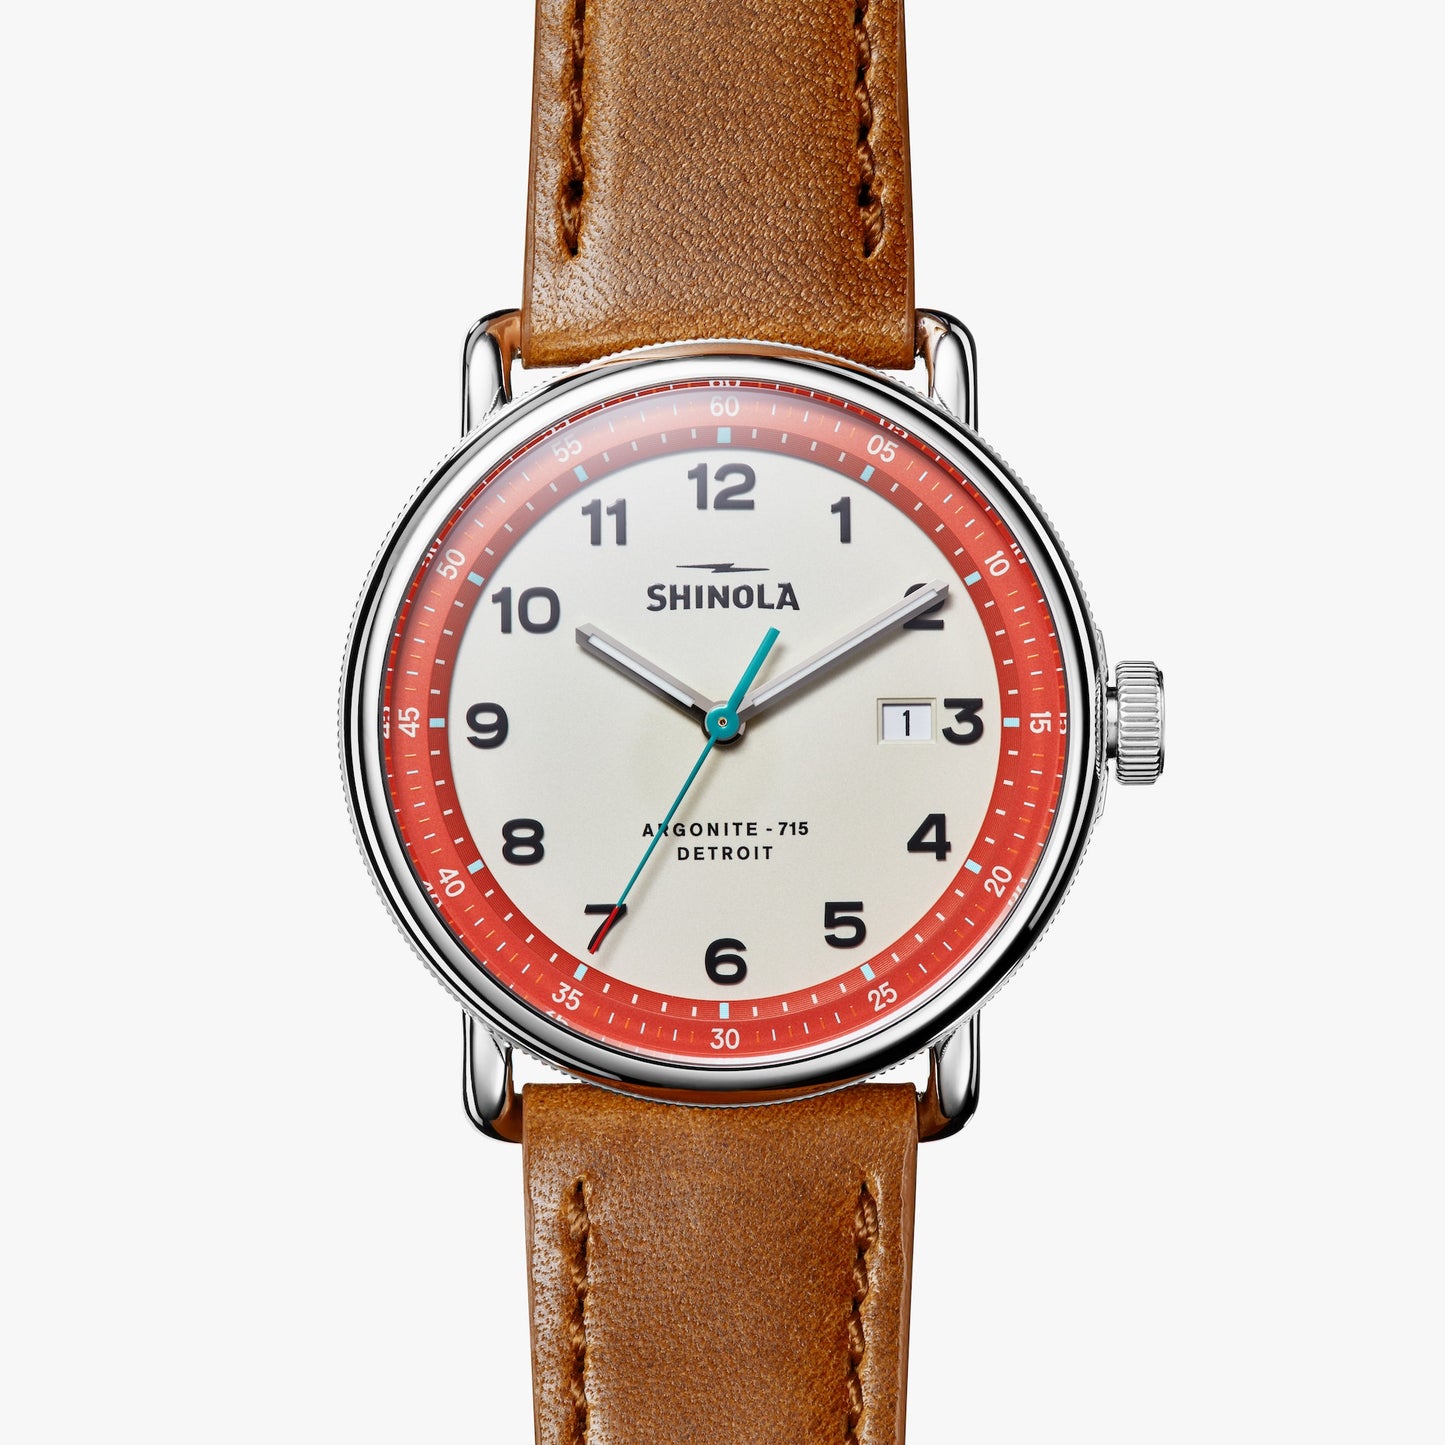 The Canfield Model C56 43mm in Gray